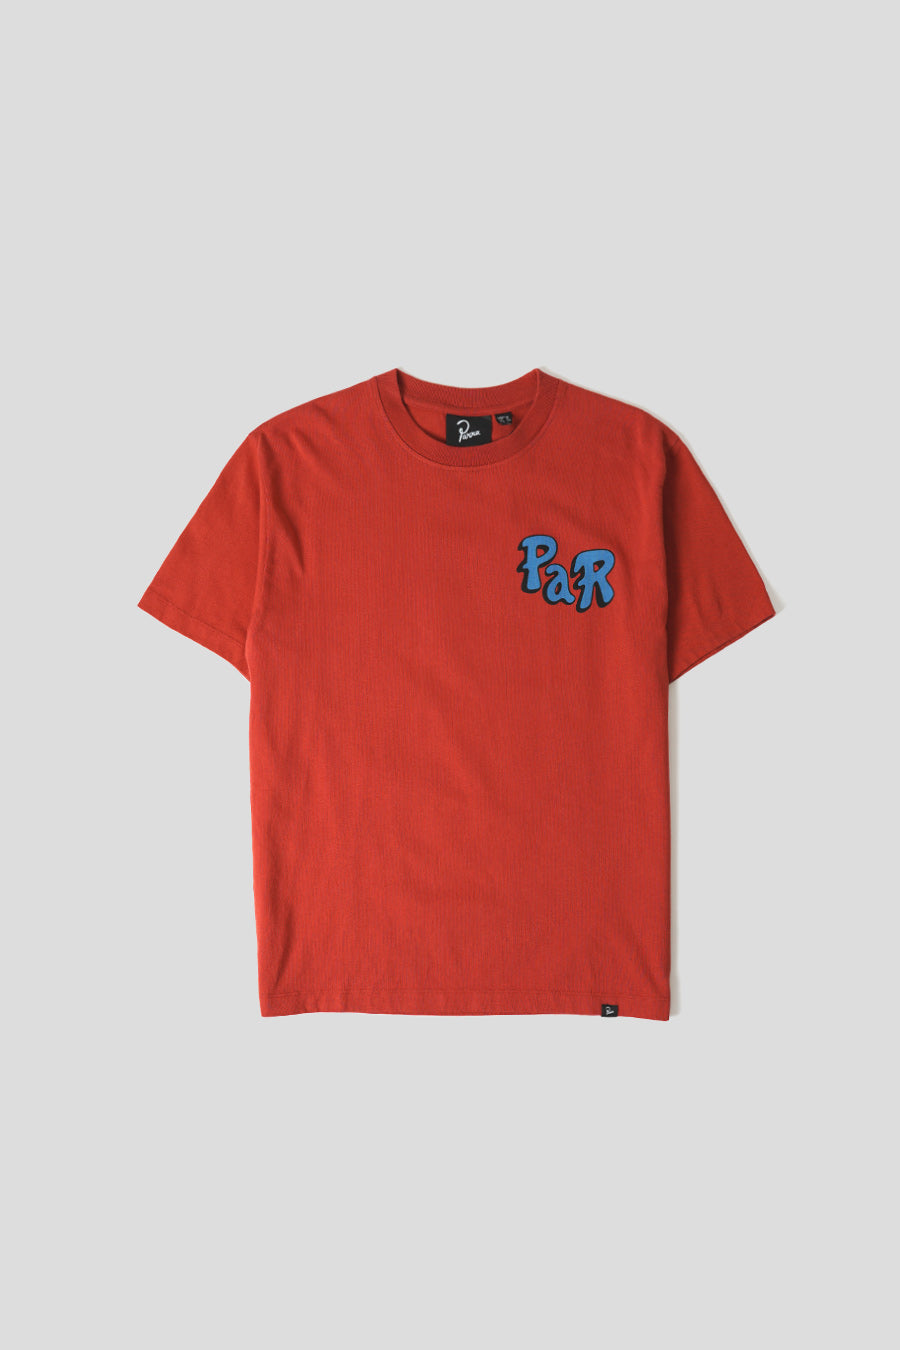 BY PARRA - RUST WHEELED BIRD T-SHIRTS - LE LABO STORE